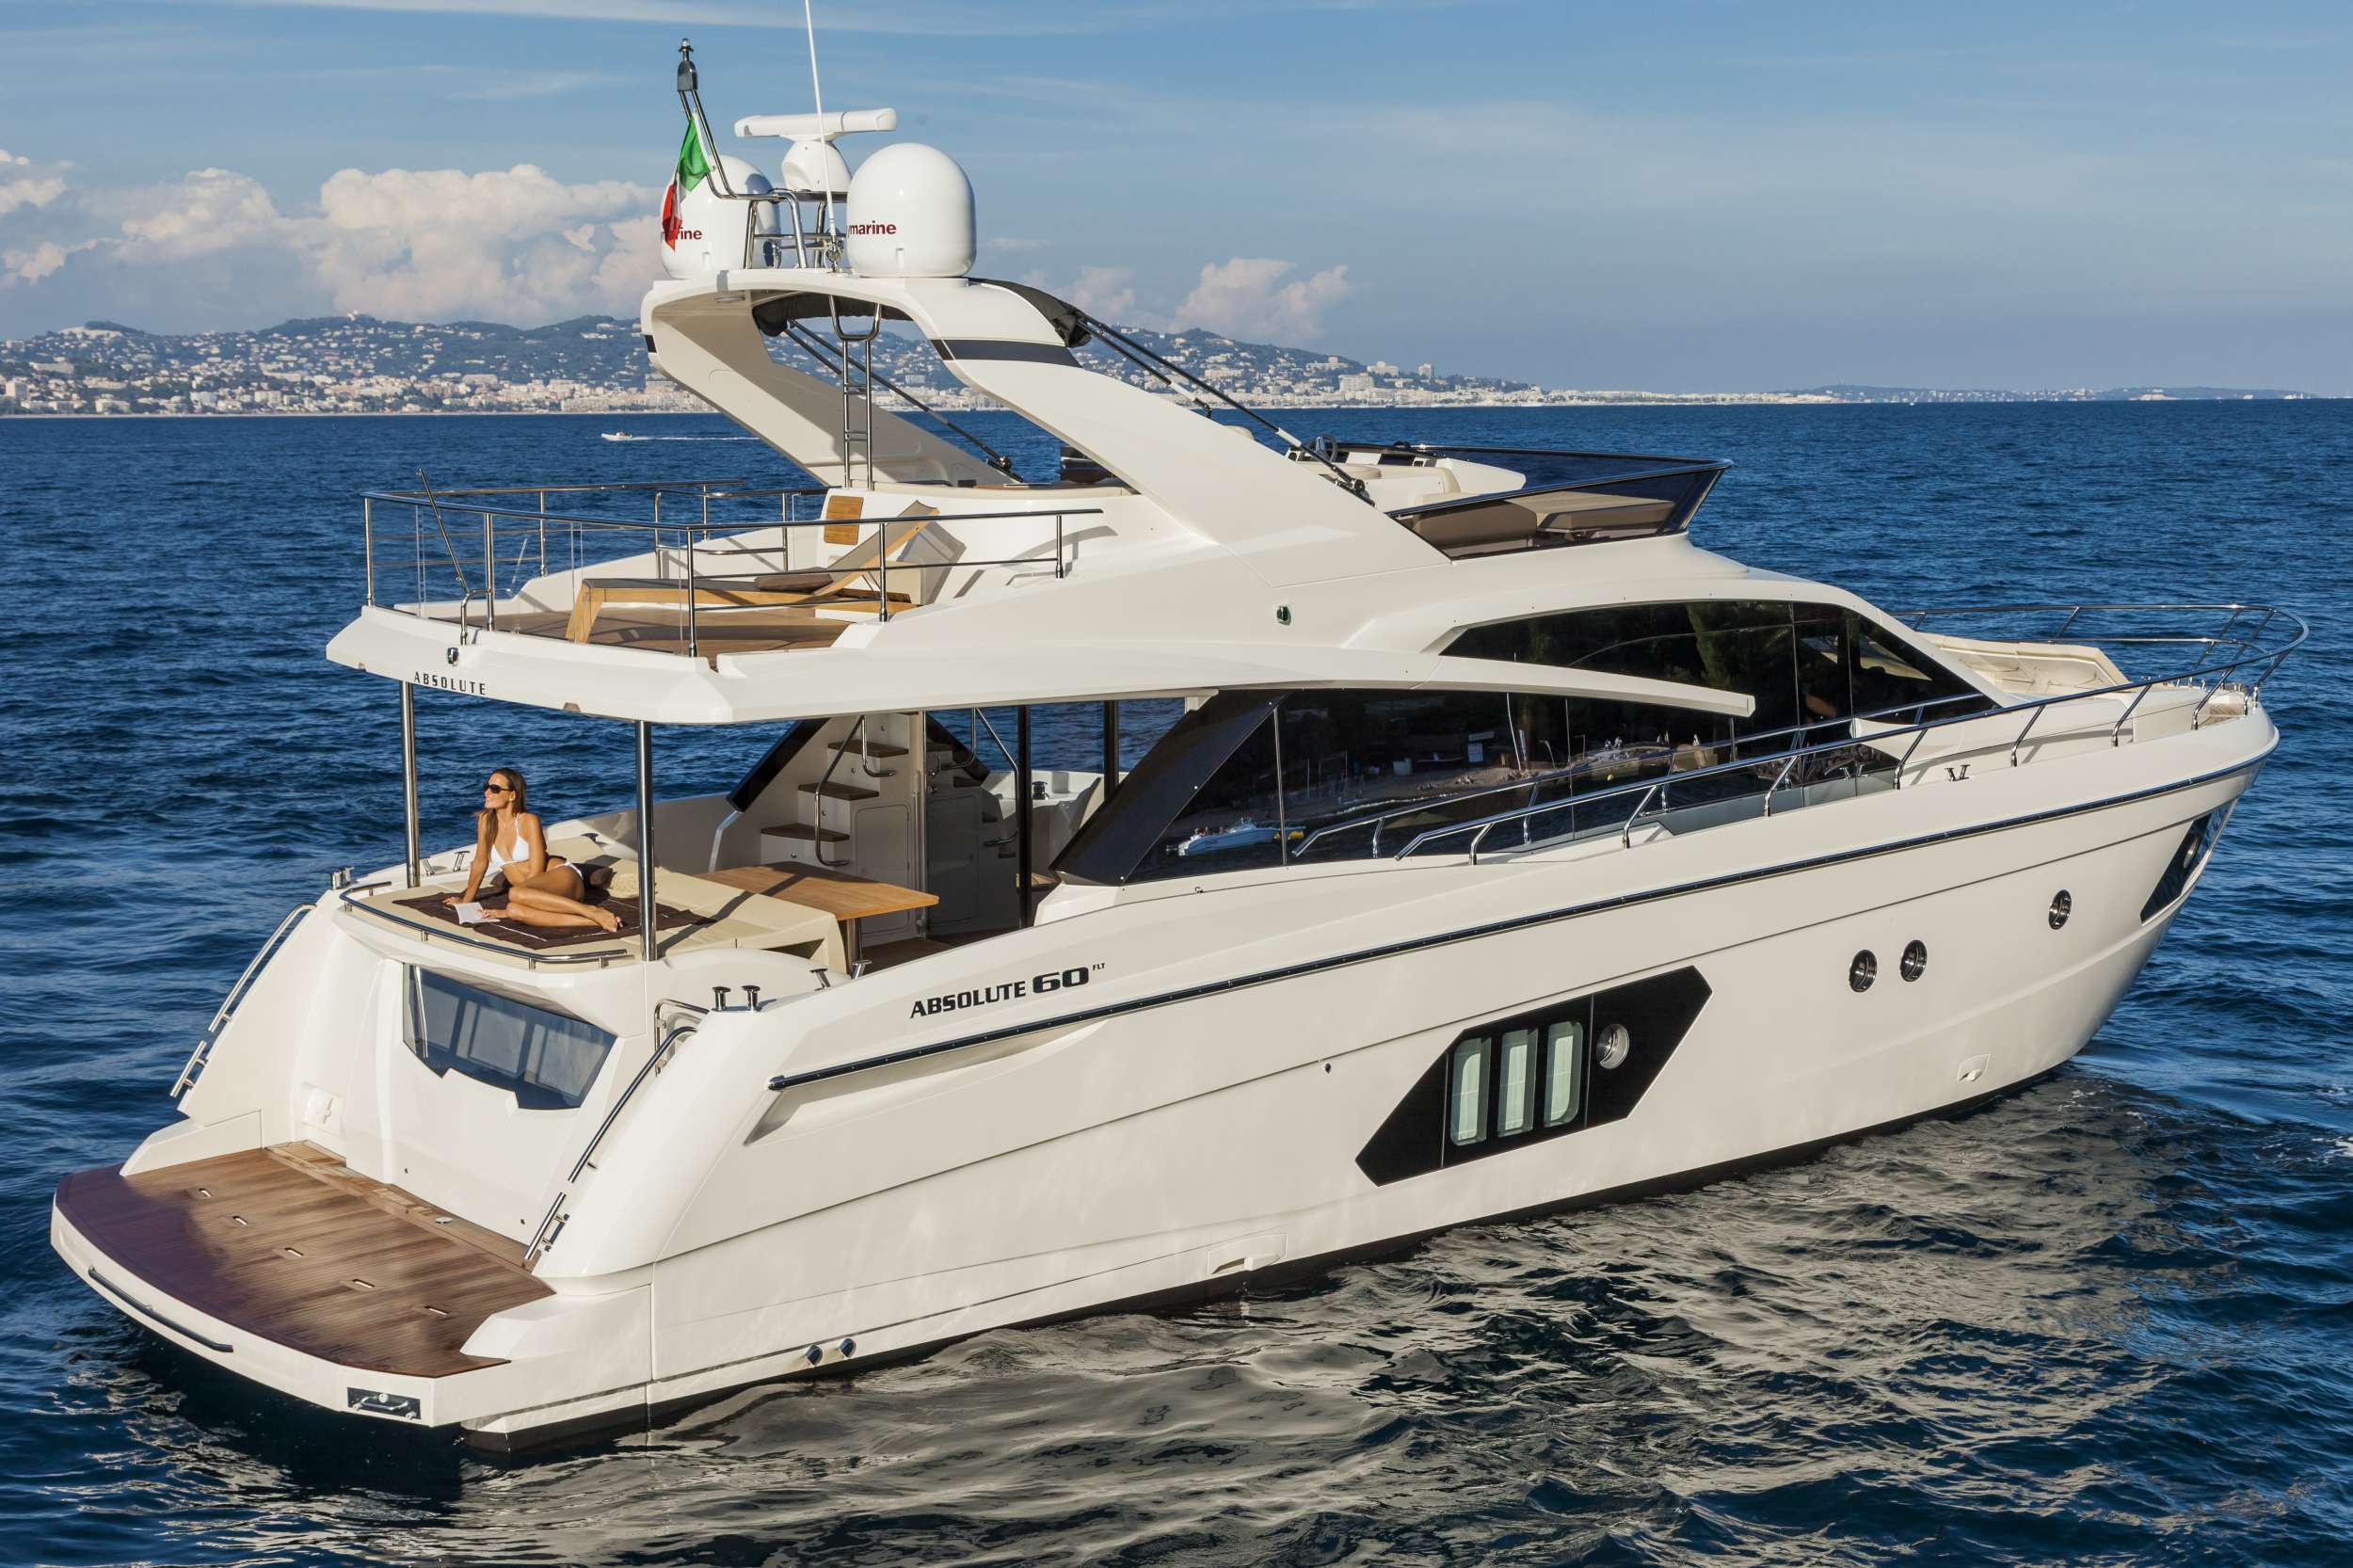 ABSOLUTE - Yacht Charter Cogolin & Boat hire in Fr. Riviera, Corsica & Sardinia 1